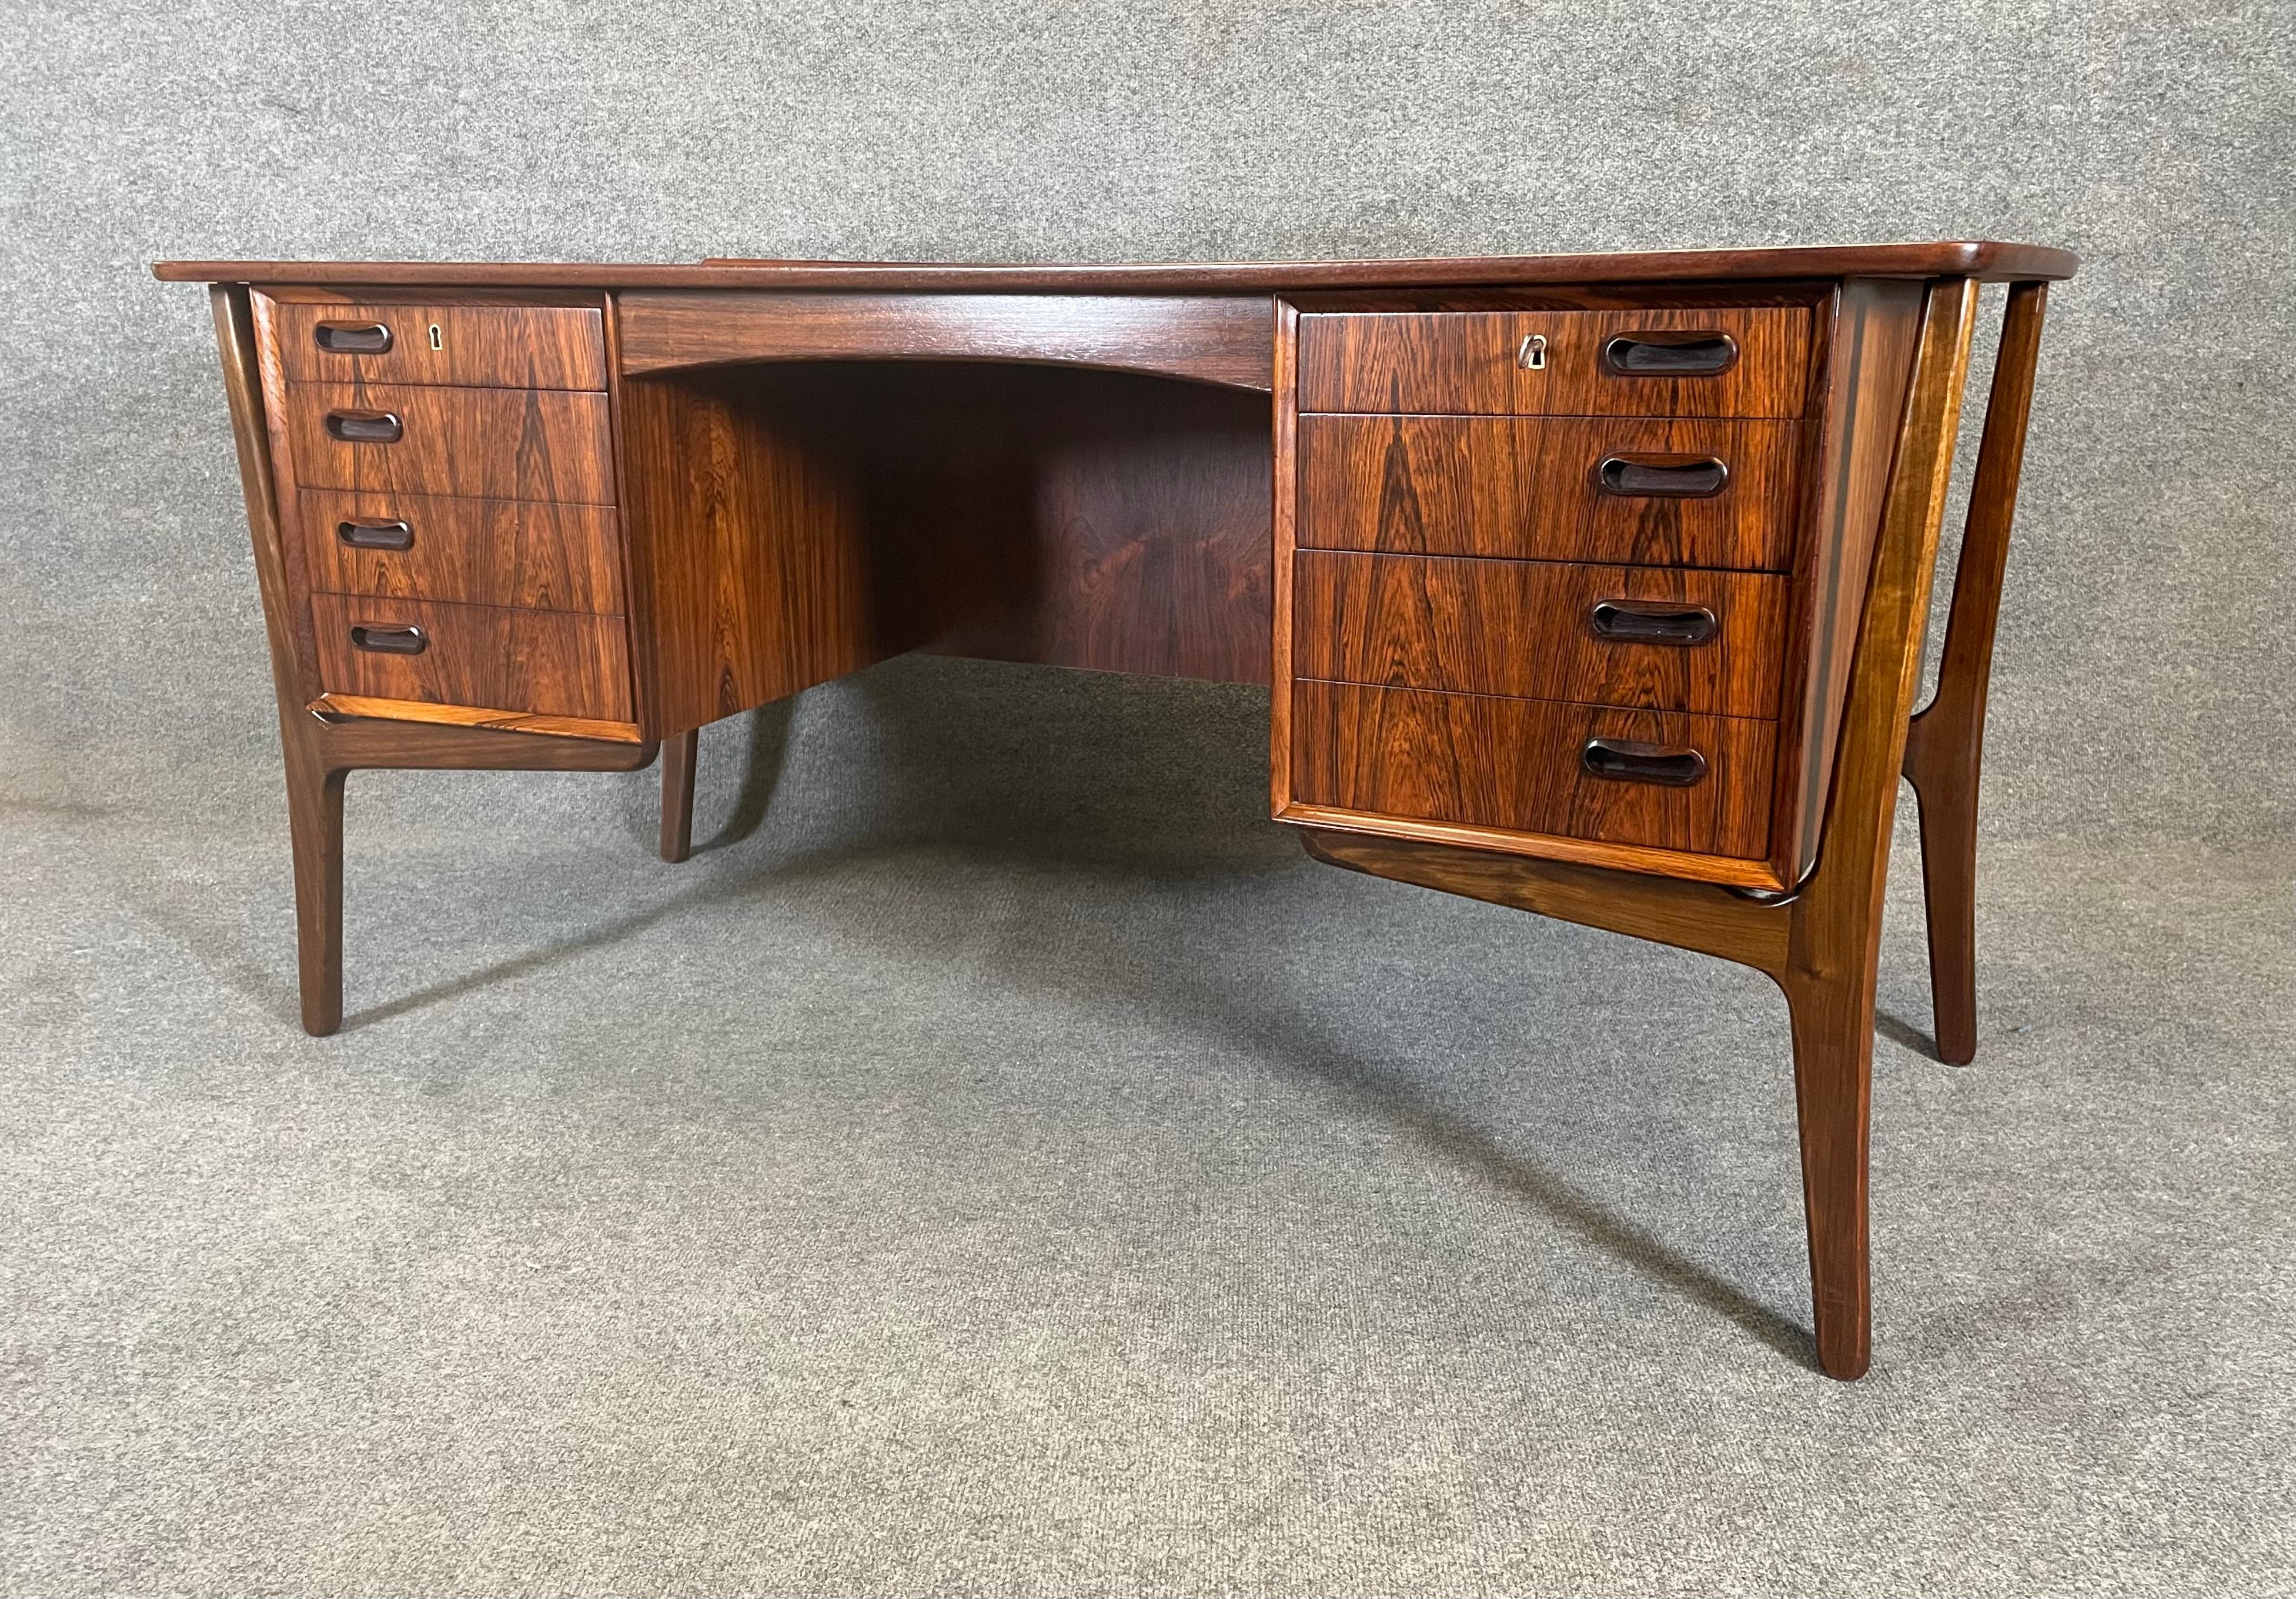 Here is a beautiful and sought after scandinavian modern executive desk in rosewood designed by Svend Madsen and manufactured by HP Hansen in Denmark in the 1960's.
This special desk, recently imported from Europe to California before its